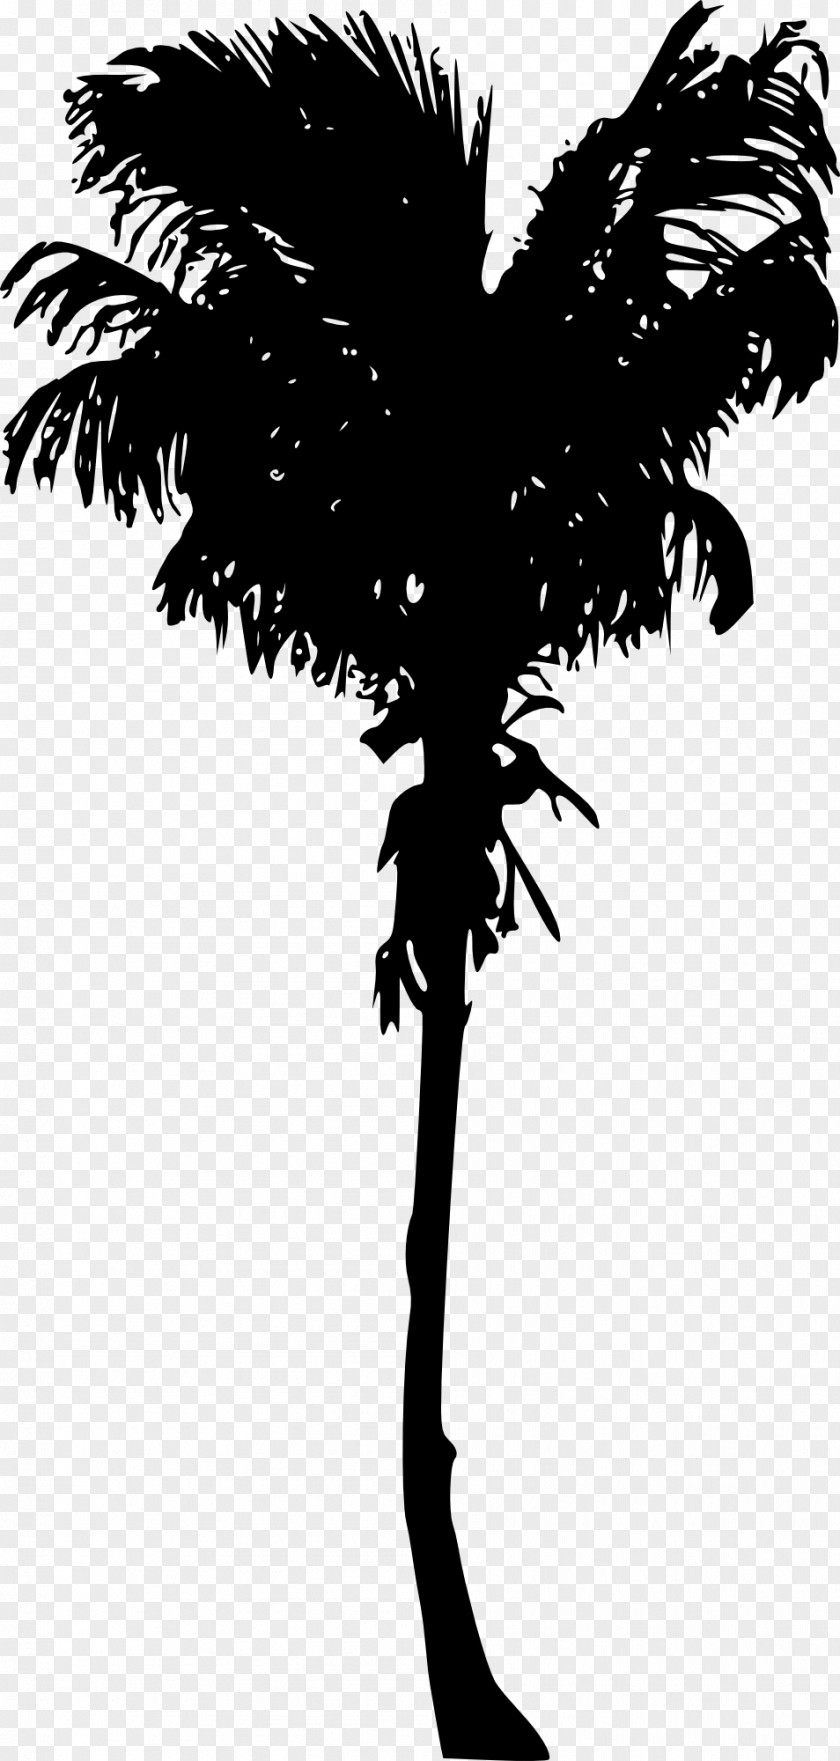 Palm Tree Arecaceae Woody Plant Asian Palmyra PNG